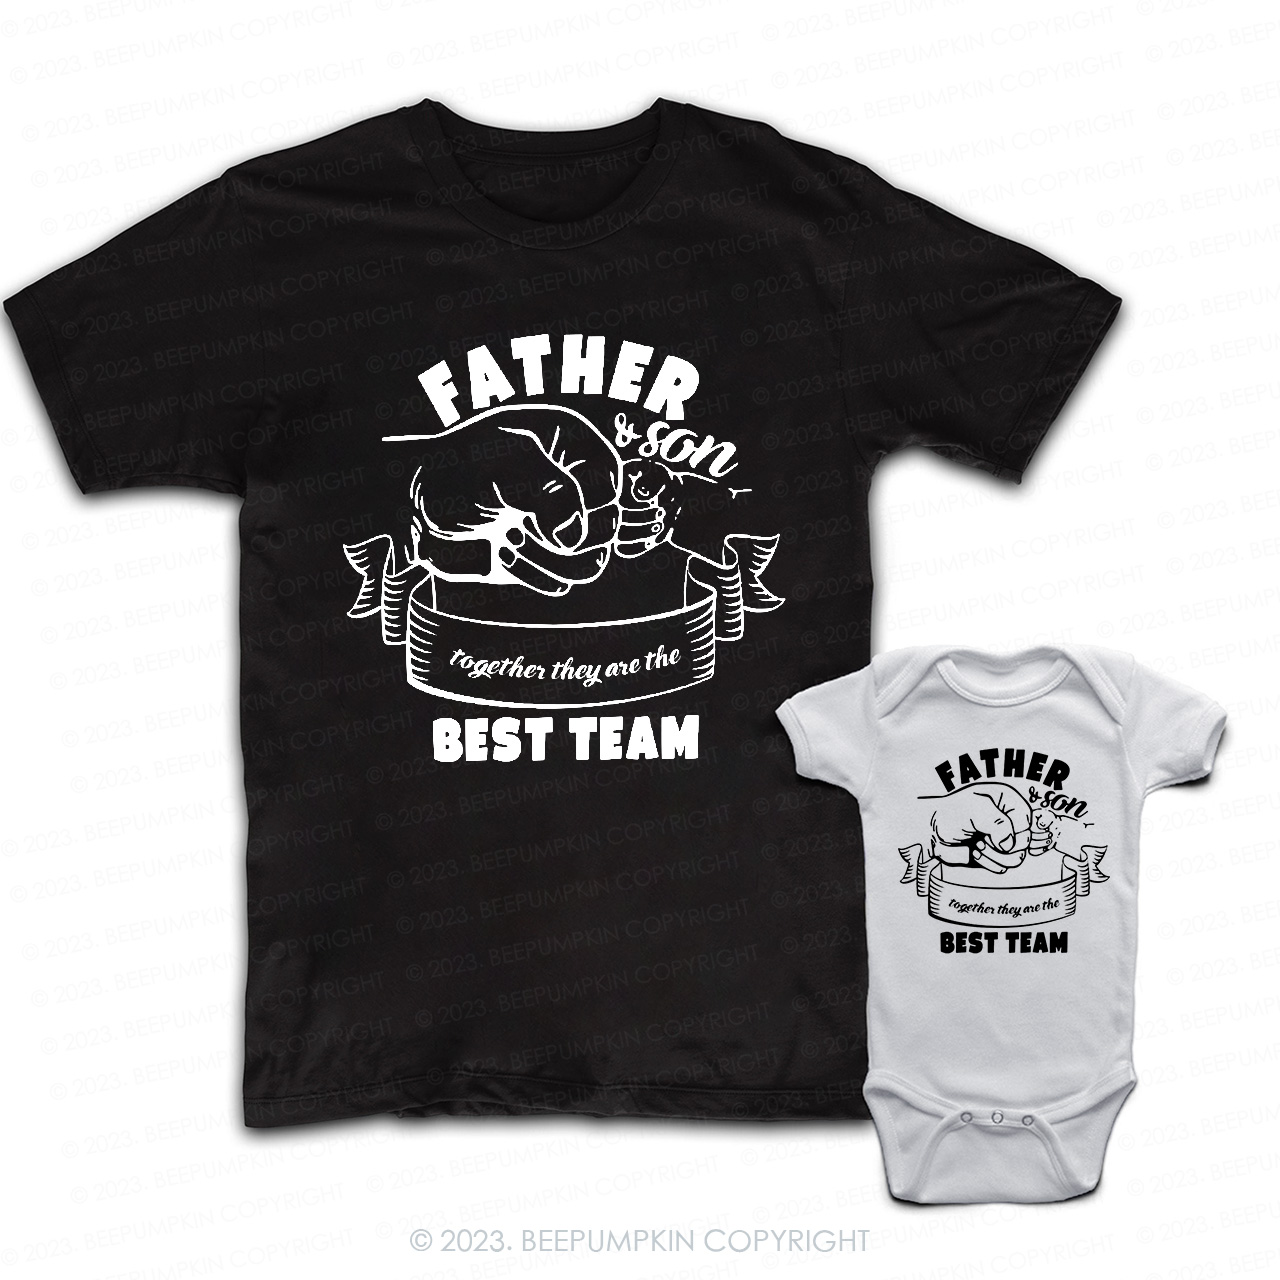 Dad & Me Matching T-Shirts –They Are The Best Team